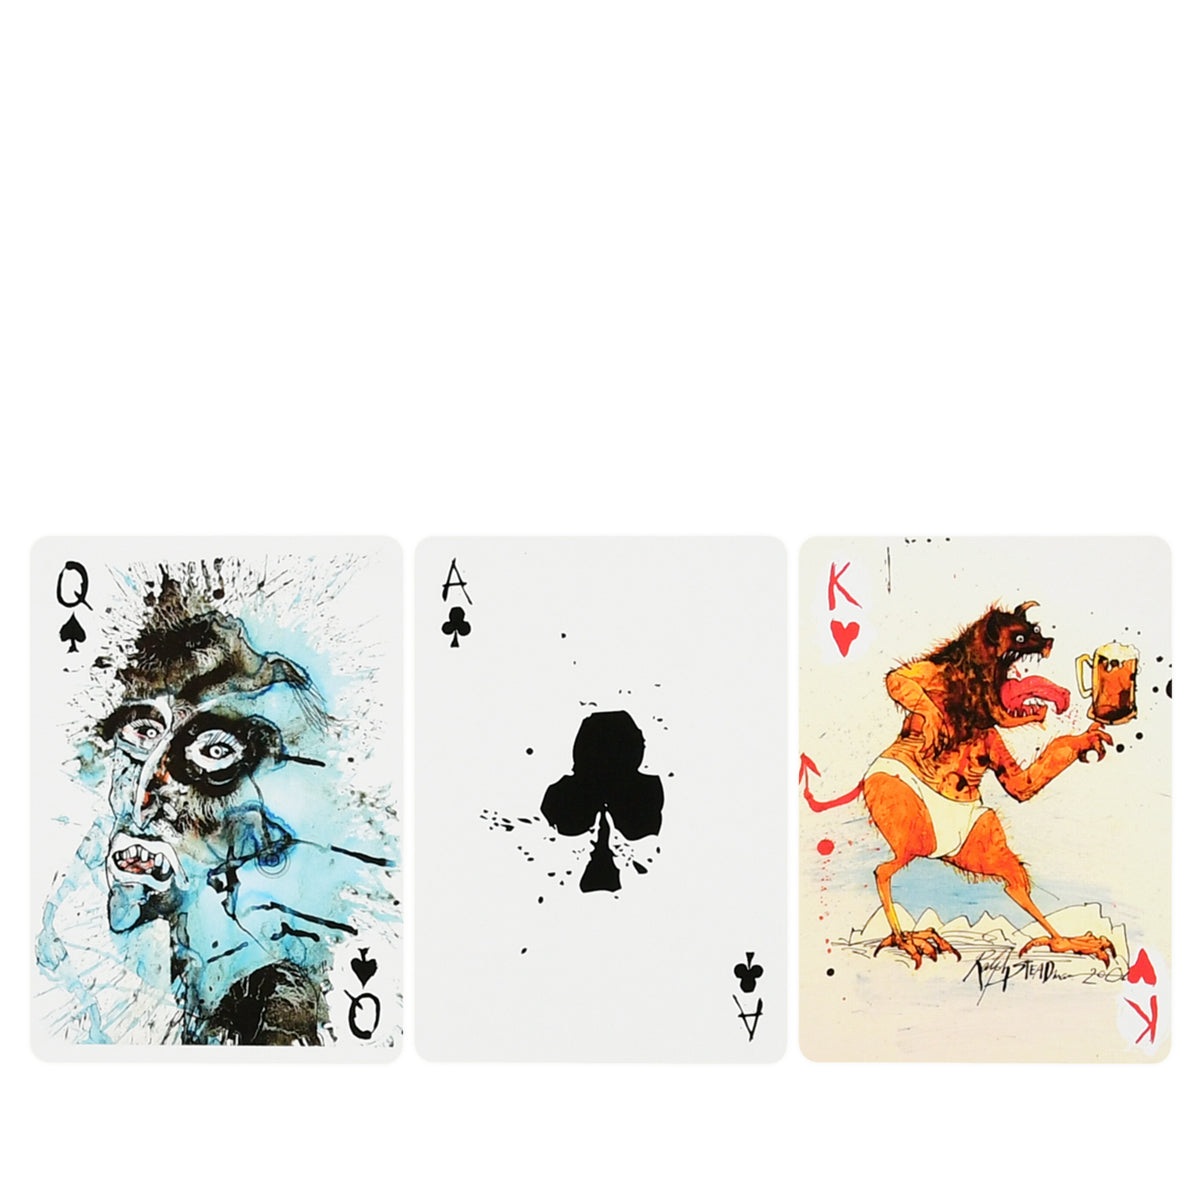 ART OF PLAY - PLAYING CARDS - FLYING DOG - EDITION 2